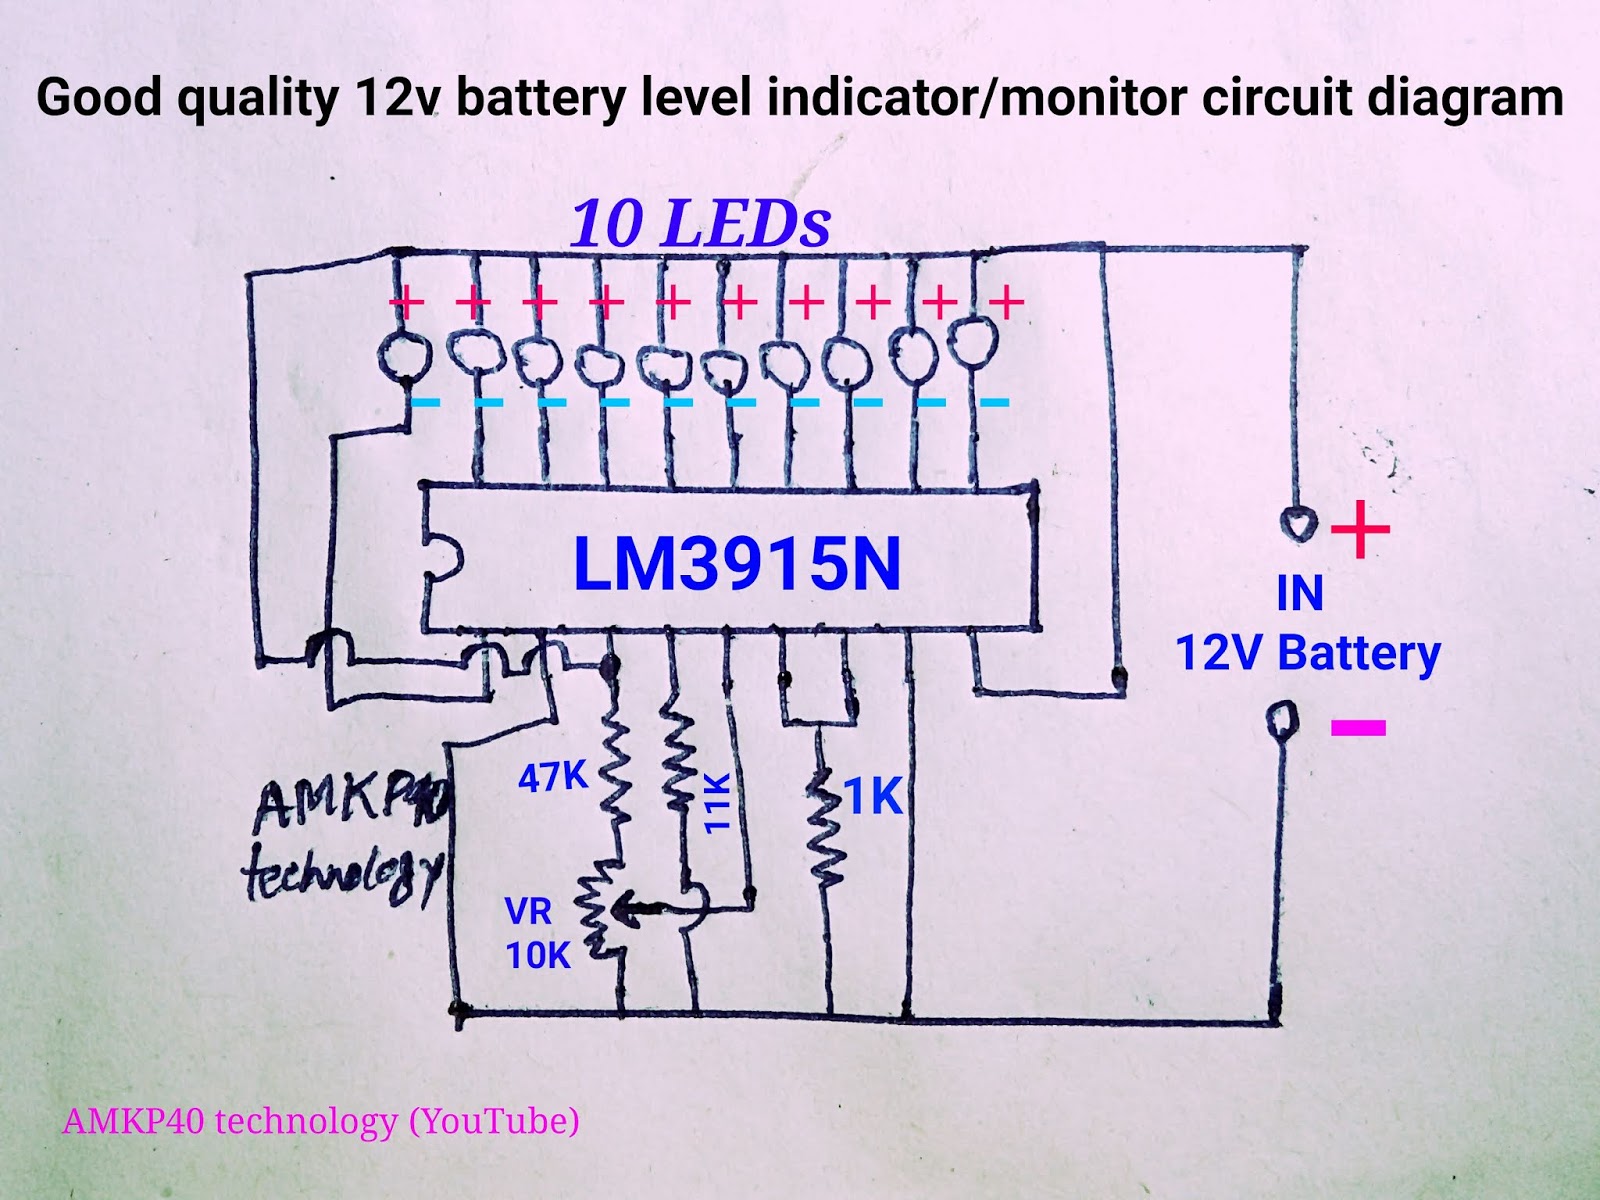 How To Make 12V battery level monitor/indicator circuit at home.